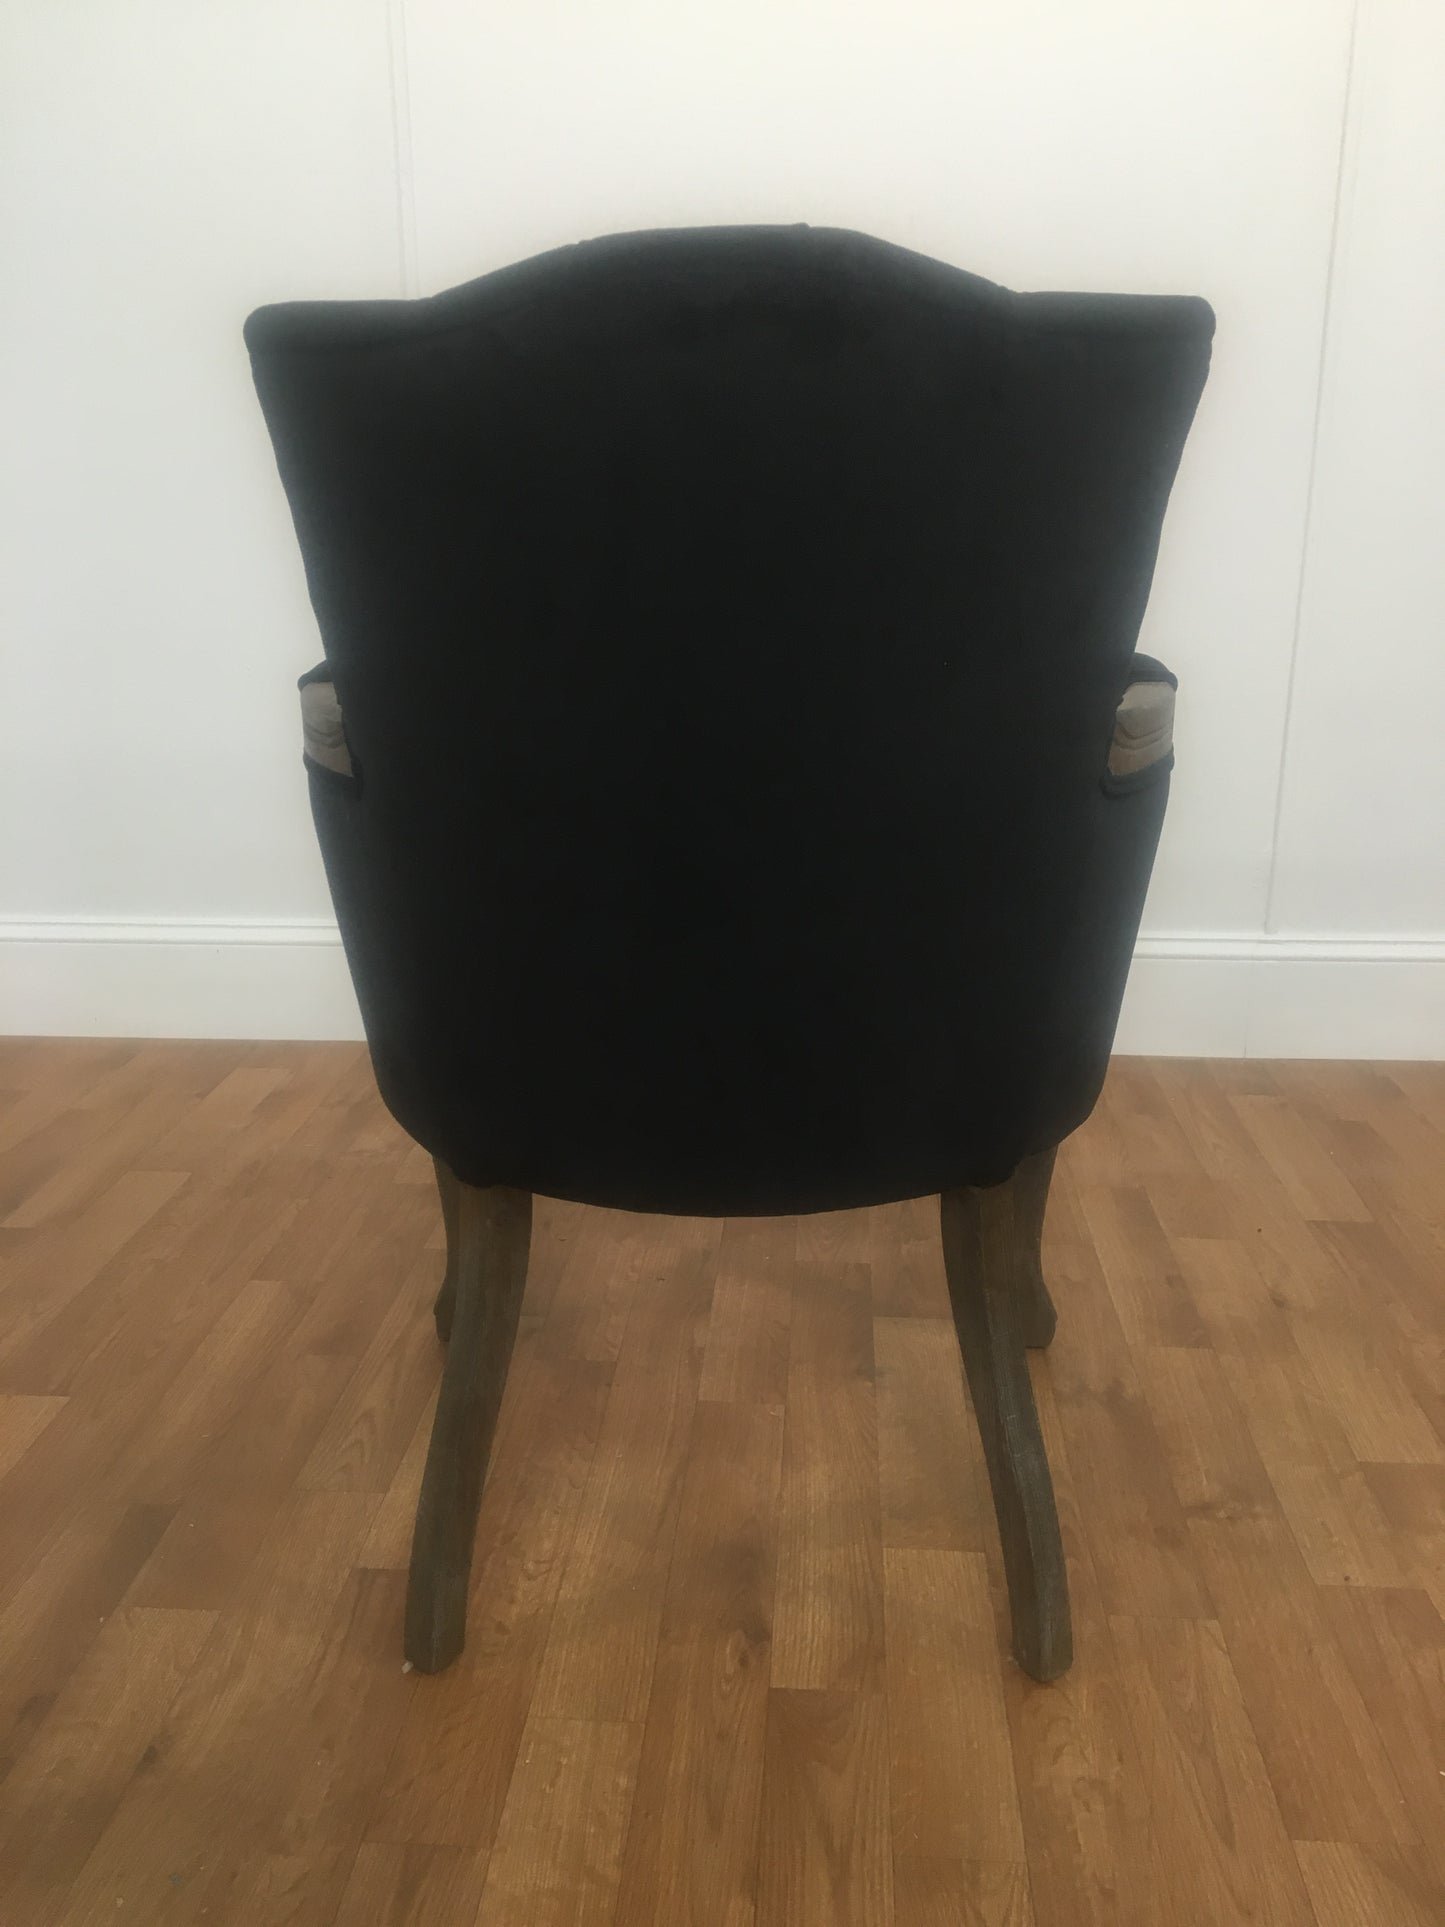 BLACK VELVET ARM CHAIR WITH WOODEN ARMS AND LEGS